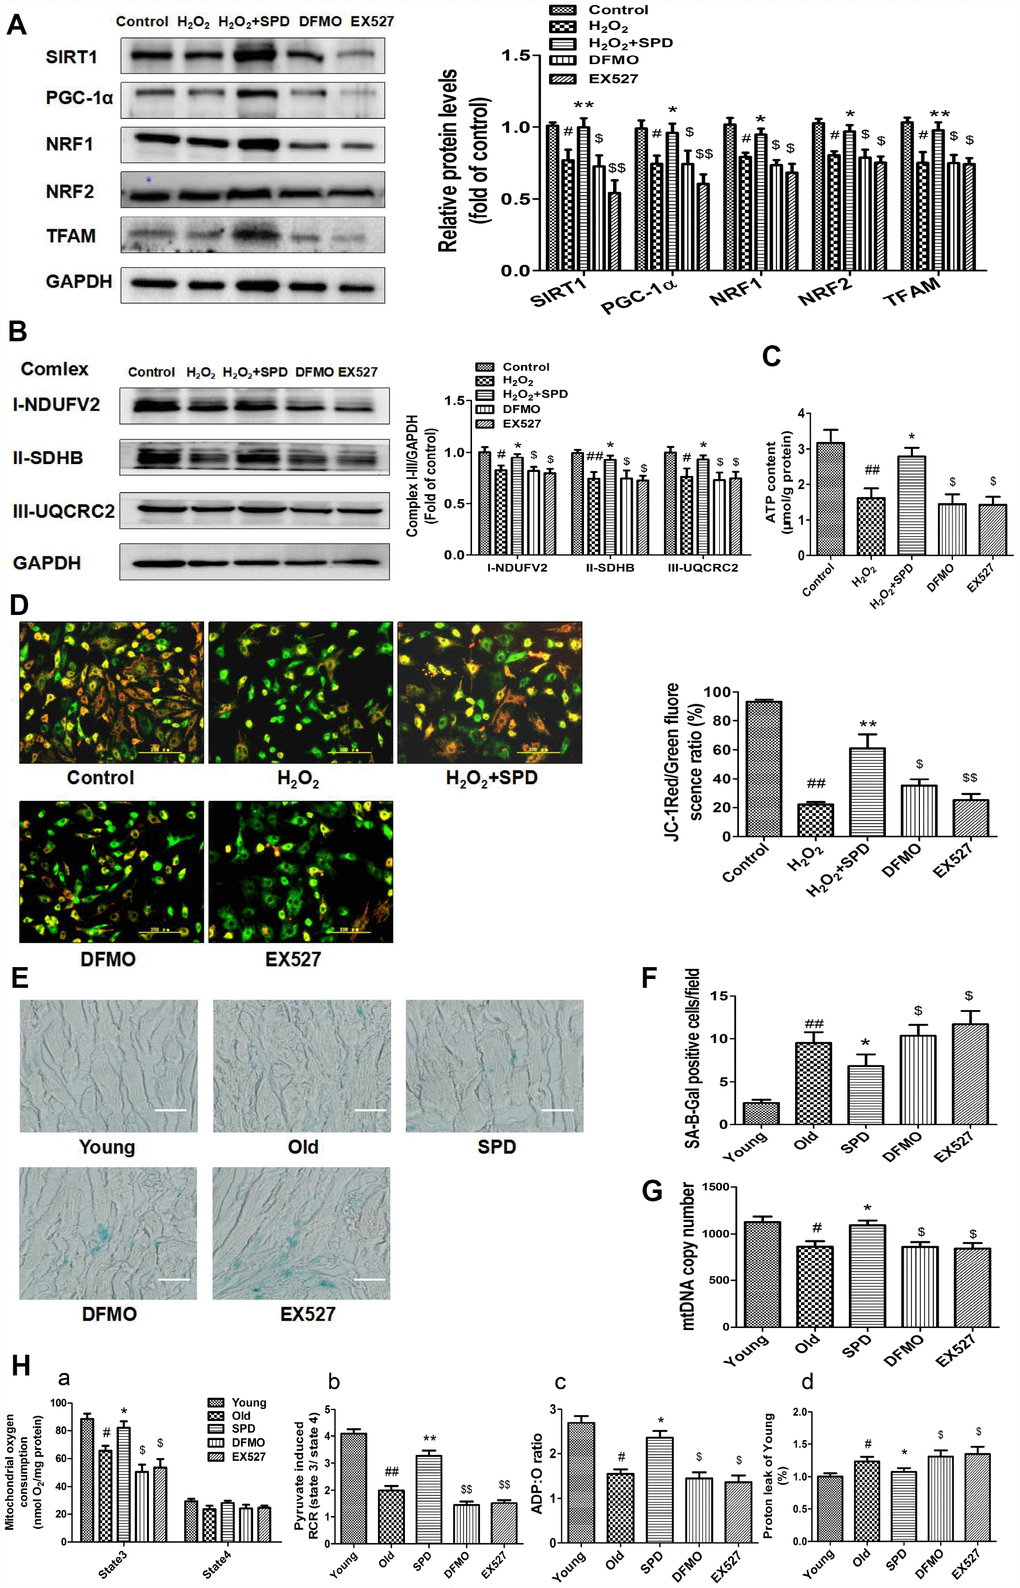 Inhibition of polyamine biogenesis and SIRT1 activity attenuates SPD-induced mitochondrial biogenesis and functional improvement in aging cardiomyocytes. For in vitro studies, NRMCs and H9C2 cells were cultured as follows: normal culture (Control), H2O2 treatment-induced aging (H2O2), H2O2 plus SPD (H2O2 + SPD), H2O2 plus SPD and DFMO (DFMO), or H2O2 plus SPD and EX527 (EX527). (A) Representative immunoblot bands for SIRT1, PGC-1α, NRF1, NRF2, and TFAM, and quantification of protein expression in NRMCs. GAPDH was used as loading control (n = 4). (B) Representative immunoblot bands for OXPHOS complexes I (NDUFV2), II (SDHB), and III (UQCRC2), and quantification of protein expression in NRMCs (n = 4). (C) ATP content measured by luminometry in NRMCs (n = 8). (D) Mitochondrial transmembrane potential (ΔΨm) detected by JC-1 fluorescence staining in H9C2 cells. Mean fluorescence intensity is displayed on the right of the graphs (n = 6). # P ## P * P 2O2, ** P 2O2, $ P 2O2 + SPD, $$ P 2O2 + SPD. For in vivo studies, the rats were divided into five groups: 1) young (3 months old), 2) old (24 months old), 3) SPD (24-months-old rats treated by SPD for 6 weeks), 4) DFMO (24-month-old rats treated with SPD and DFMO plus MGBG), and 5) EX527 (24-month-old rats treated with SPD and EX527). (E) Cardiac aging evaluated by SA-β-gal staining ex-vivo. (F) SA-β-gal staining quantification. Scale bars: 20 μm (n = 6). (G) Mitochondrial DNA (mtDNA) copy number detected by real-time PCR (n = 8). (H) Mitochondrial oxidative phosphorylation (OXPHOS) efficiency was evaluated based on mitochondrial State 3 and 4 oxygen consumption (a), respiratory control rate (RCR) (b), P/O ratio (c), and proton leakage (d); n = 8. # P ## P * P ** P $ P $$ P 